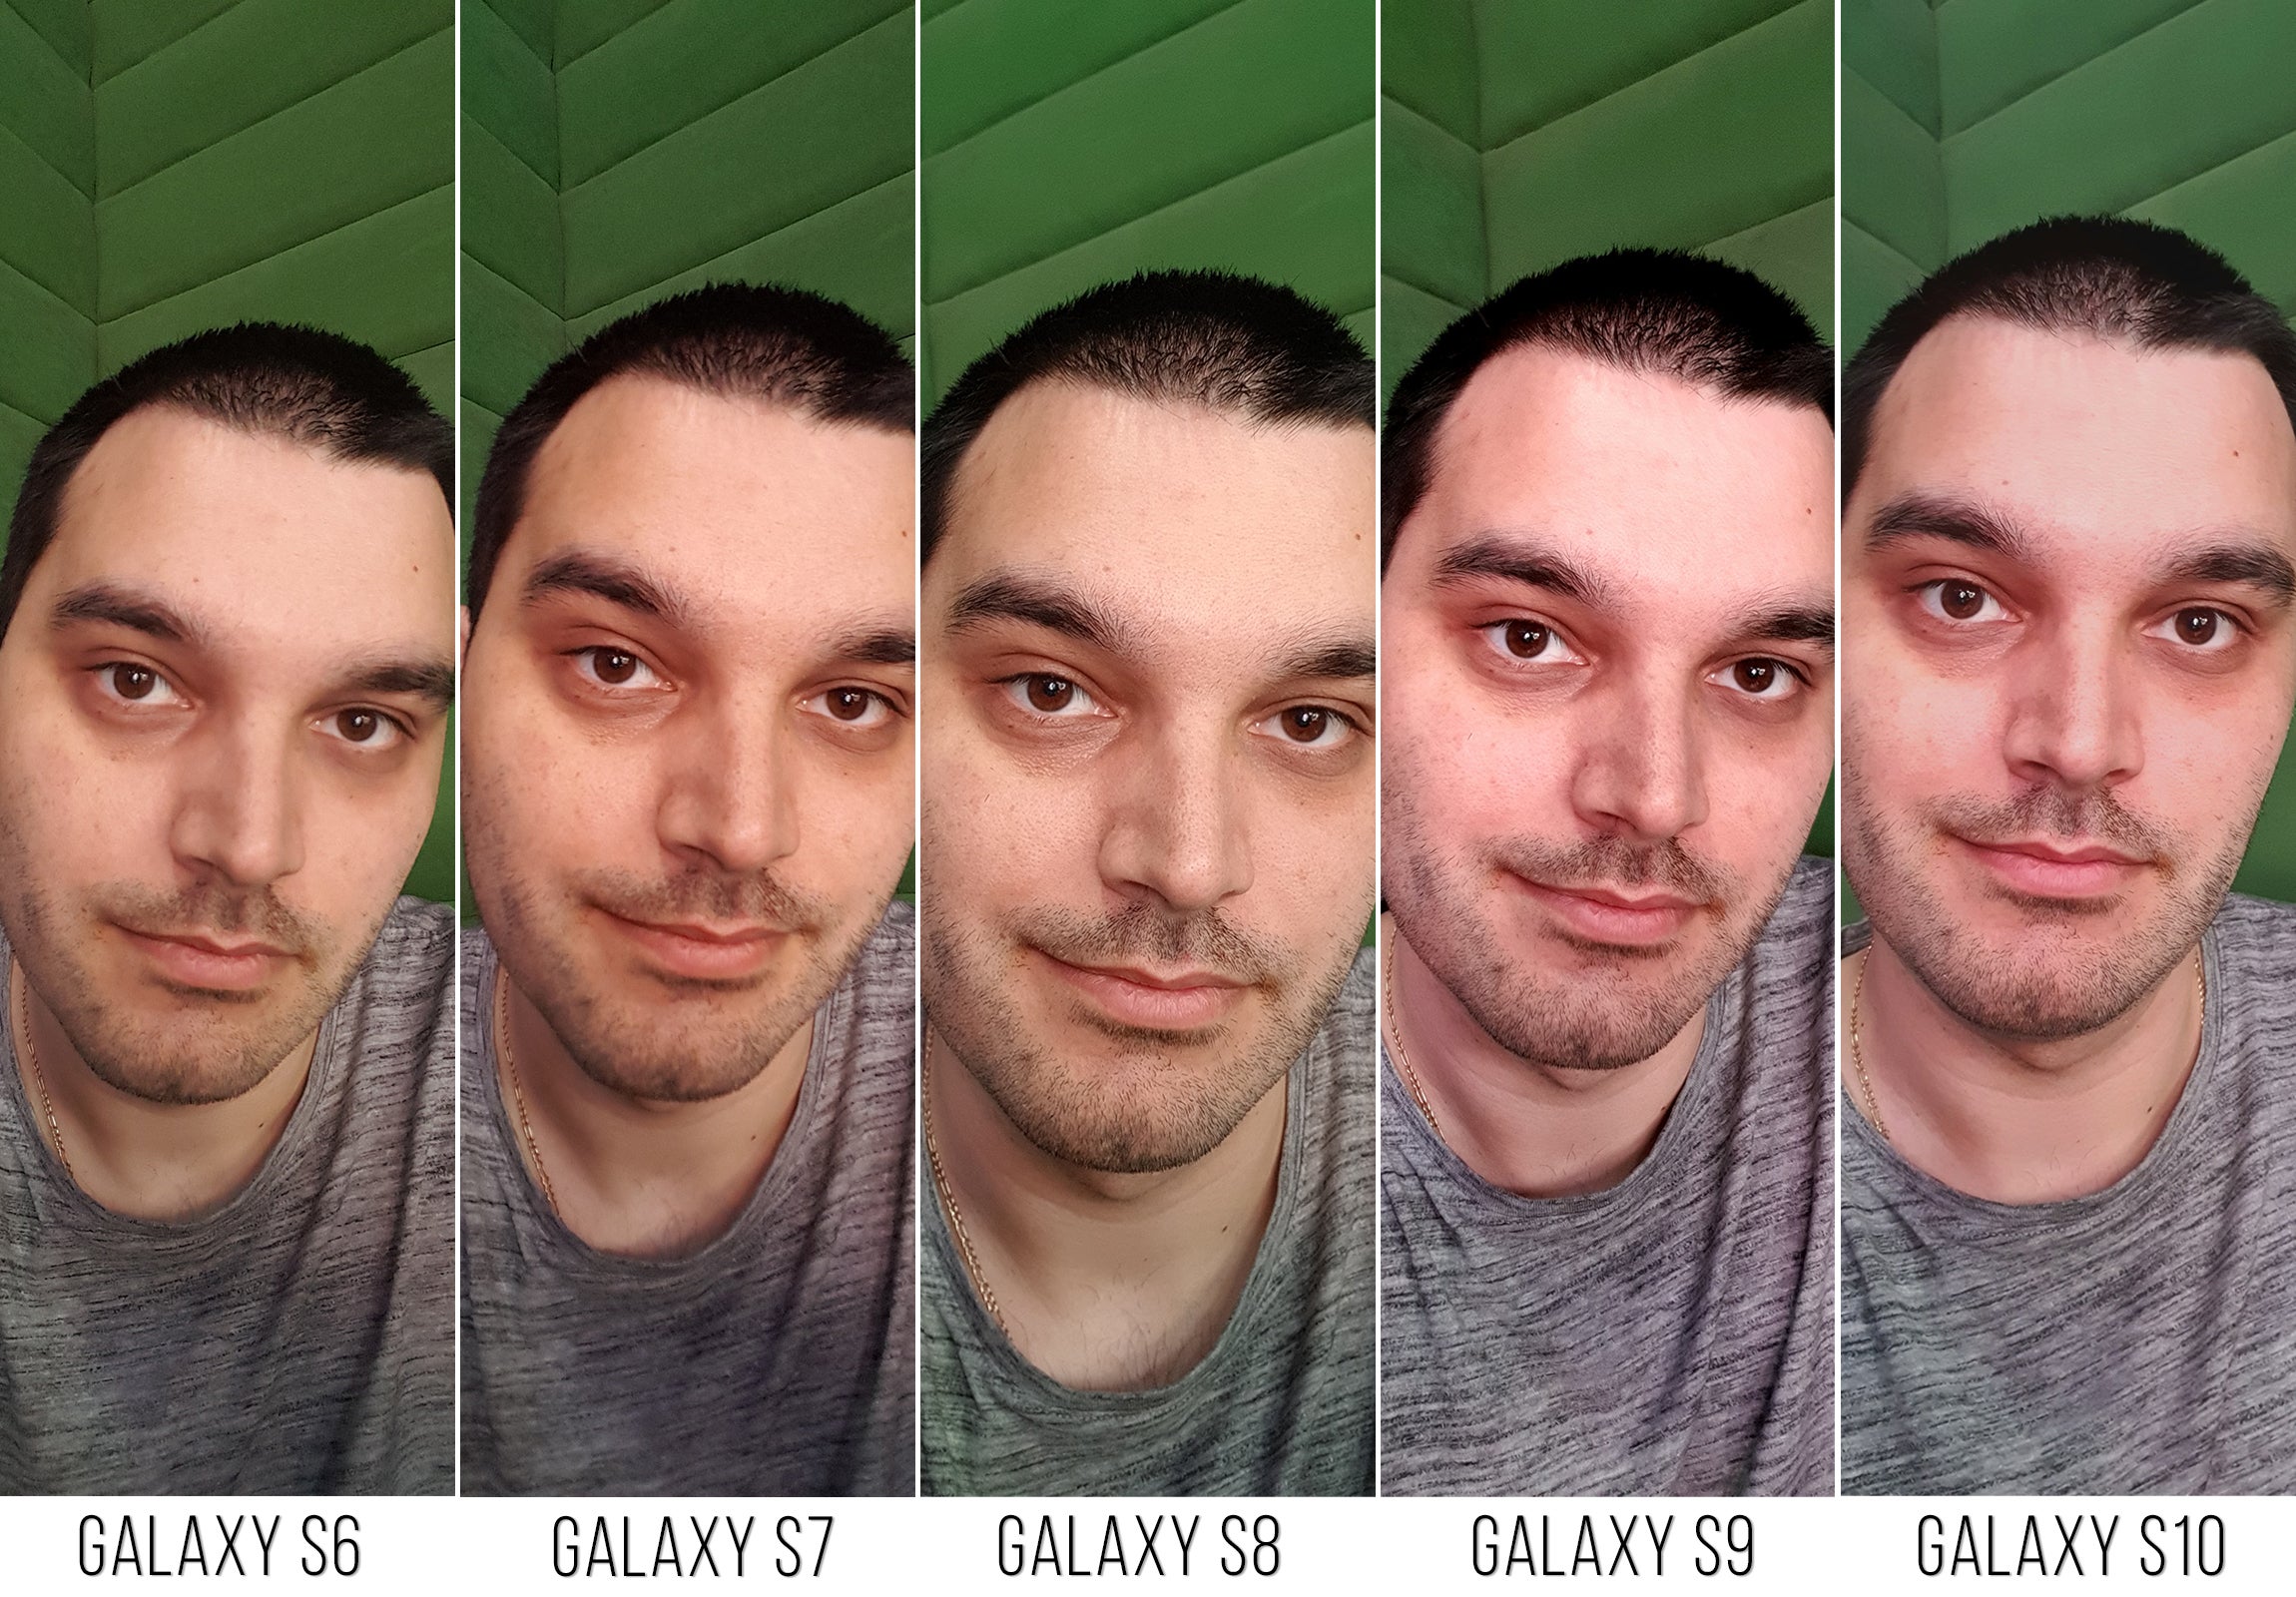 Galaxy S6 to Galaxy S10: Samsung's camera and image quality evolution through the years